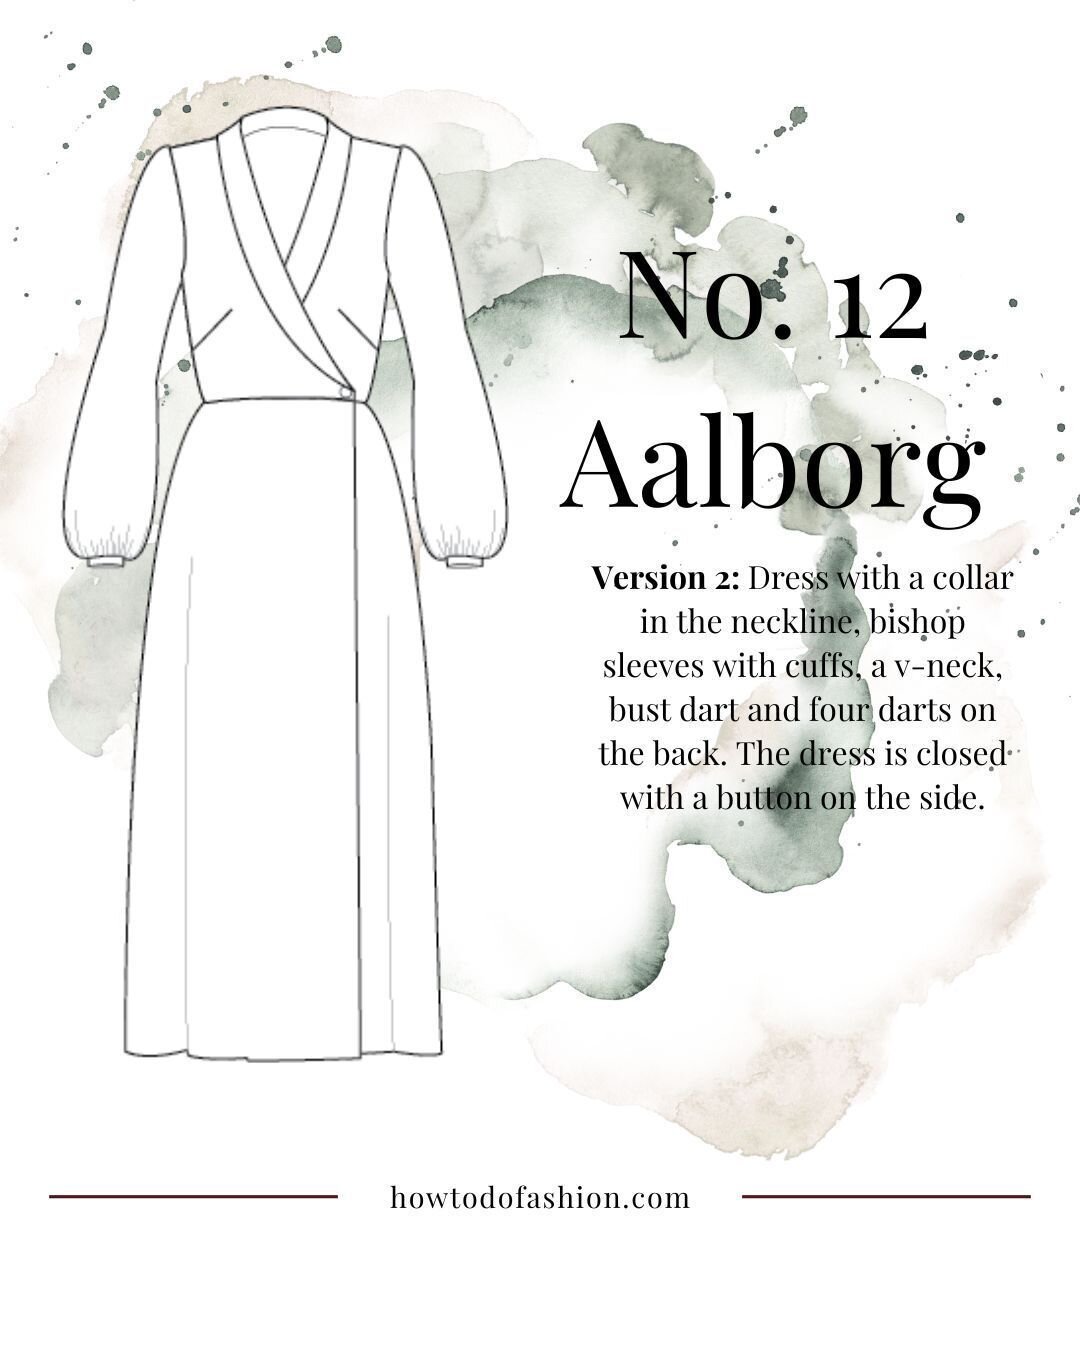 No.12 Aalborg is a evergreen summer classic for your wardrobe. If you start making one now, you can have it ready for the hot summer days! It's a wrap dress with  a collar in the neckline, bishop sleeves with cuffs, a v-neck, bust dart and four darts